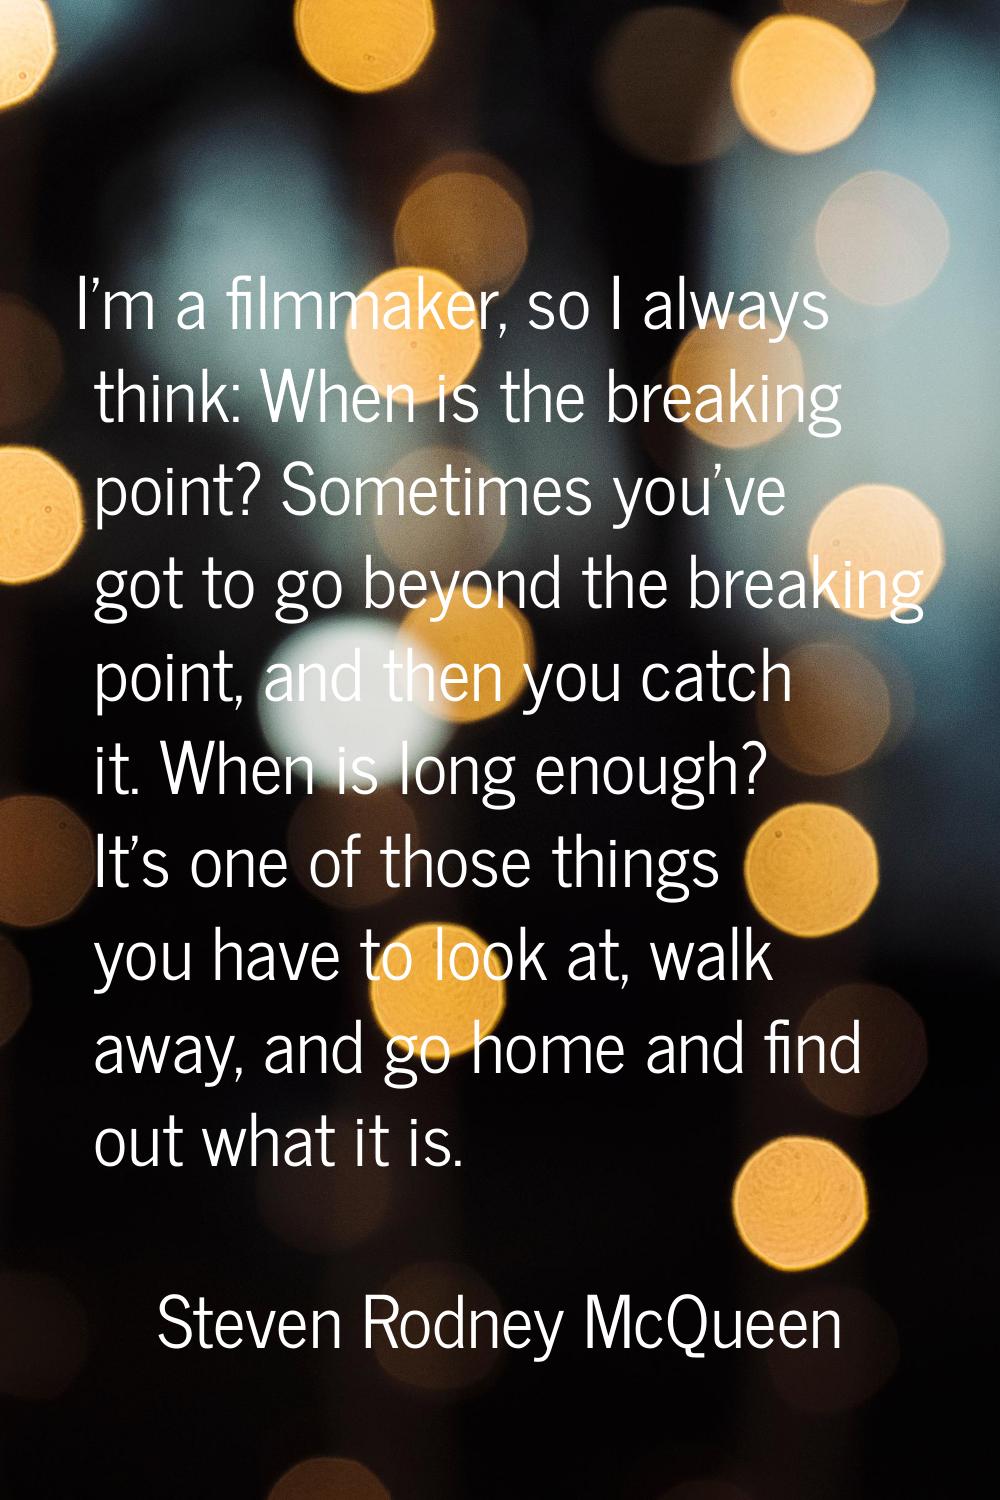 I'm a filmmaker, so I always think: When is the breaking point? Sometimes you've got to go beyond t